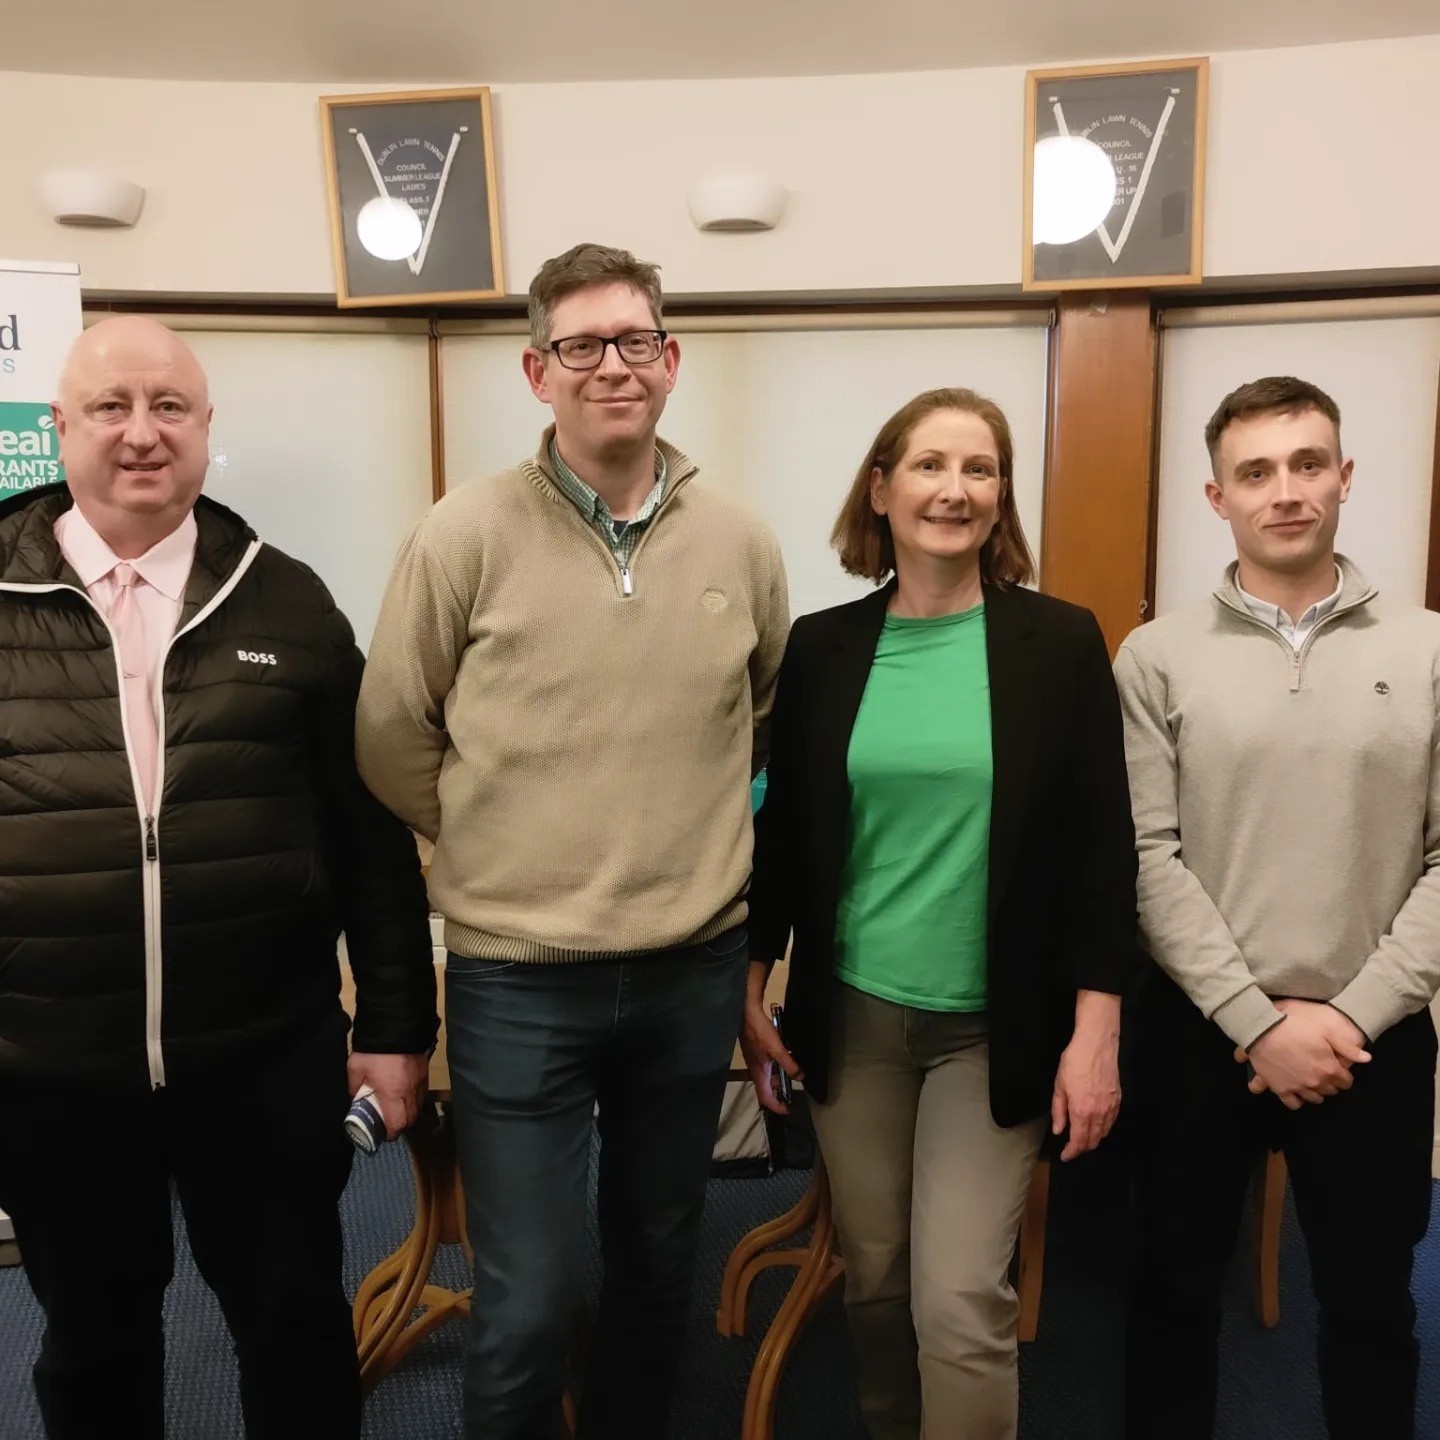 Image shows speakers from the Home Energy improvements meeting, Cllr Lourda Scott, Billy Coyle (Greystones Credit Union), Adam Calihman (Greystones Delgany Sustainable Energy Community) and Gavin Eaves (Churchfield Home Services)